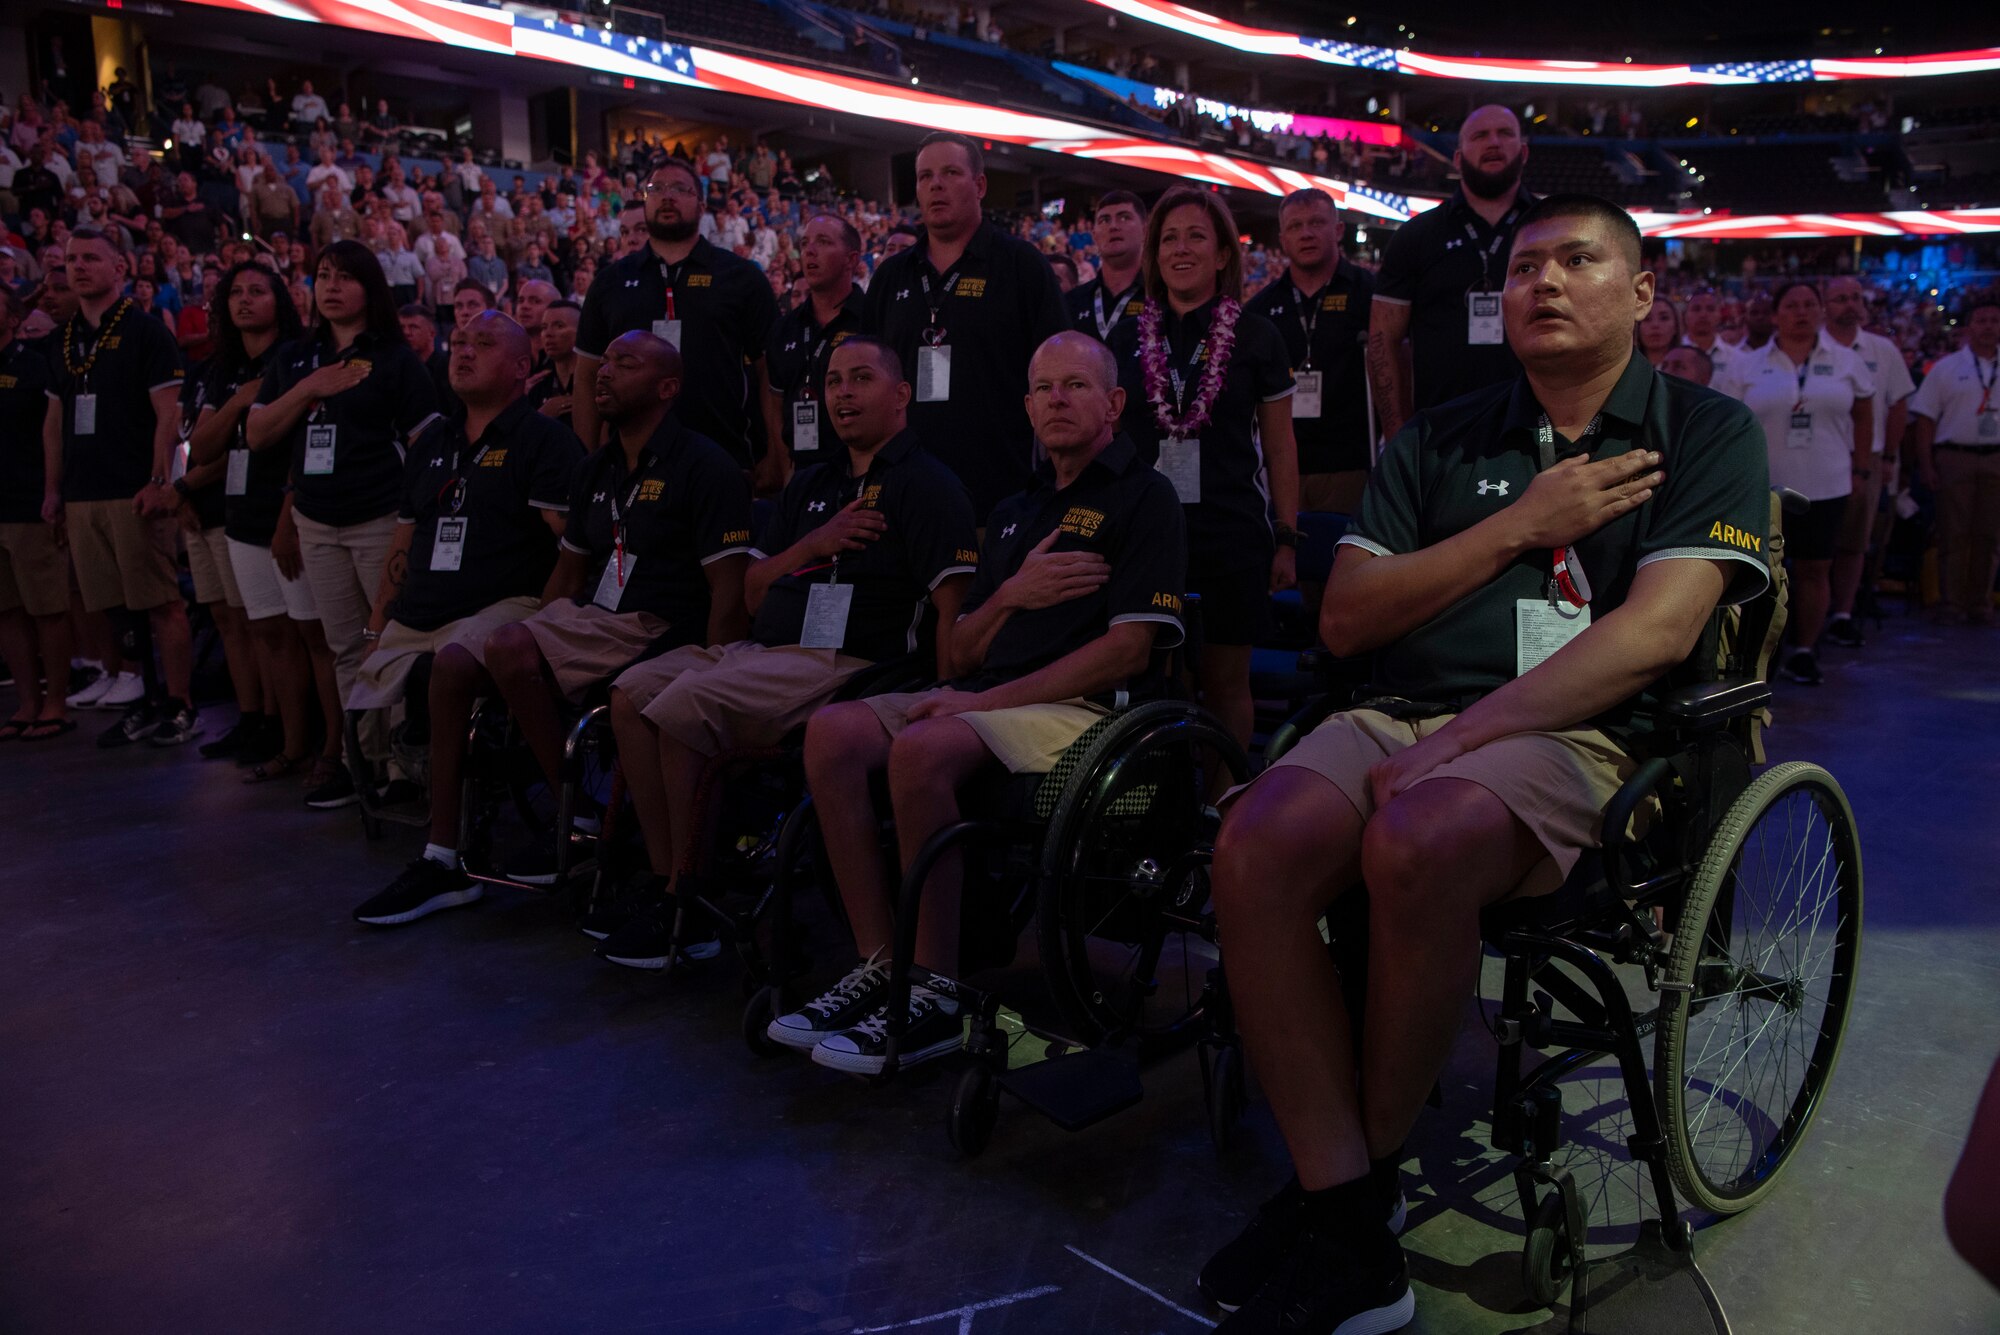 Army athletes render honors at the opening ceremony of the Department of Defense Warrior Games, Tampa, Florida, June 22, 2019. (DoD photo by Lisa Ferdinando)